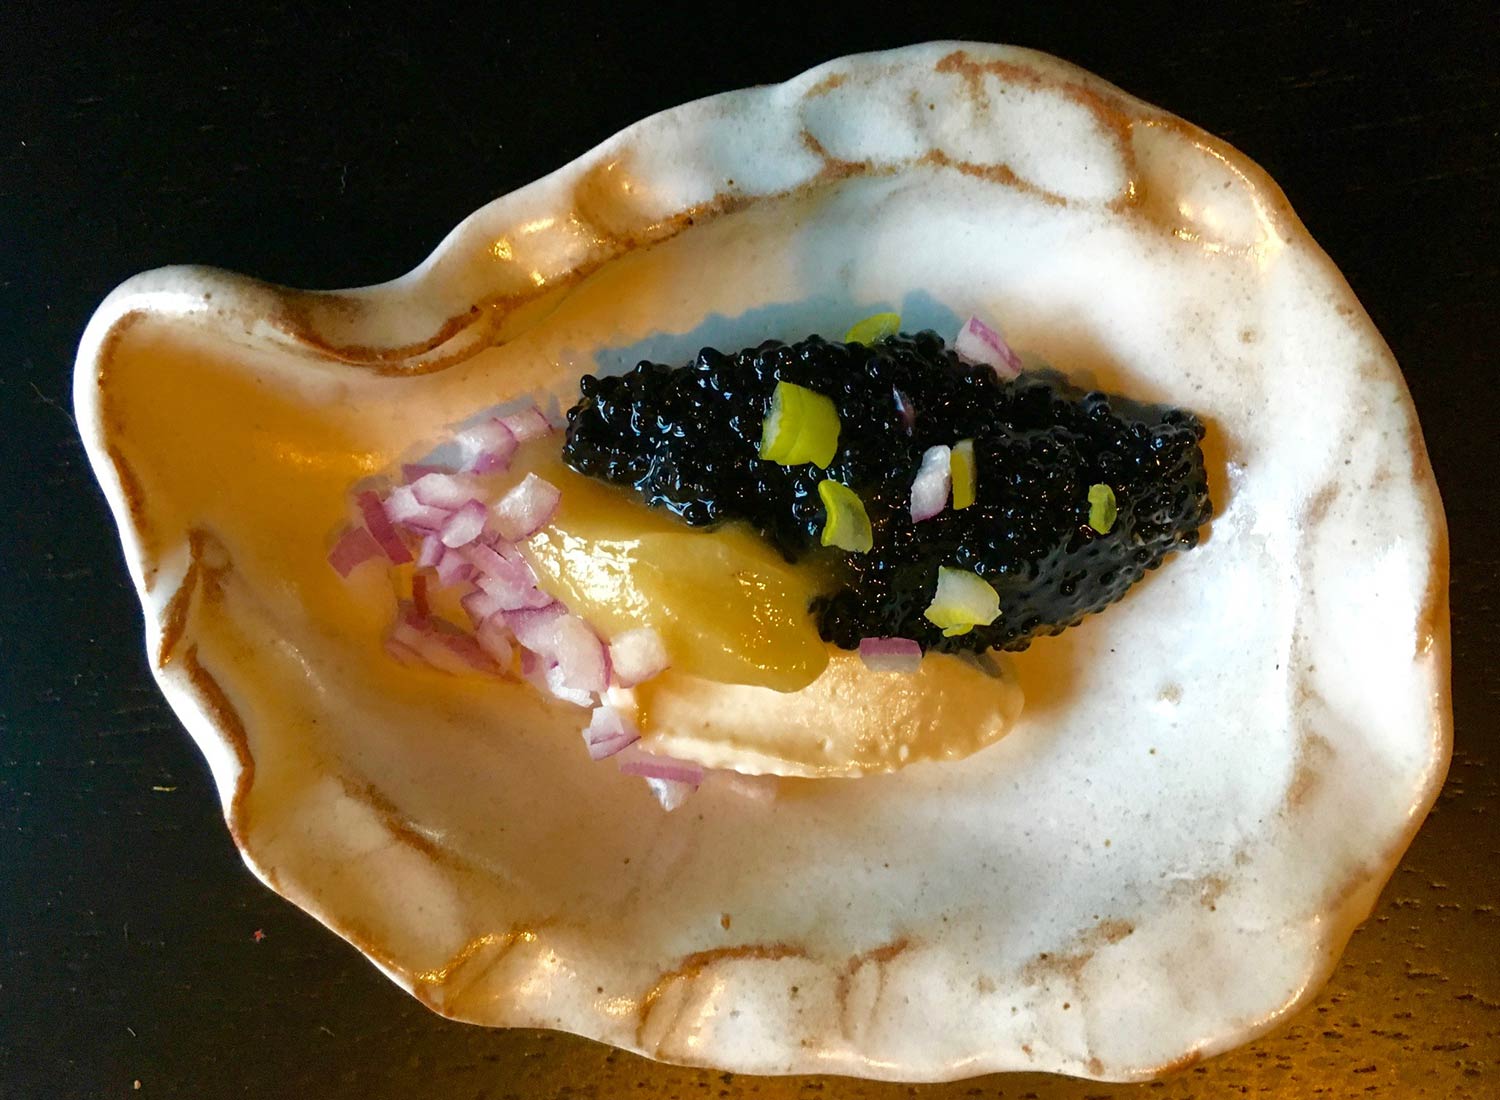 Food Lab at SHO: vegan gastronomy in a cold climate | vegan caviar (made by caviart, kelp-based) with pine nut crème fraîche, preserved lemon puree & red onions served in a ceramic oyster shell